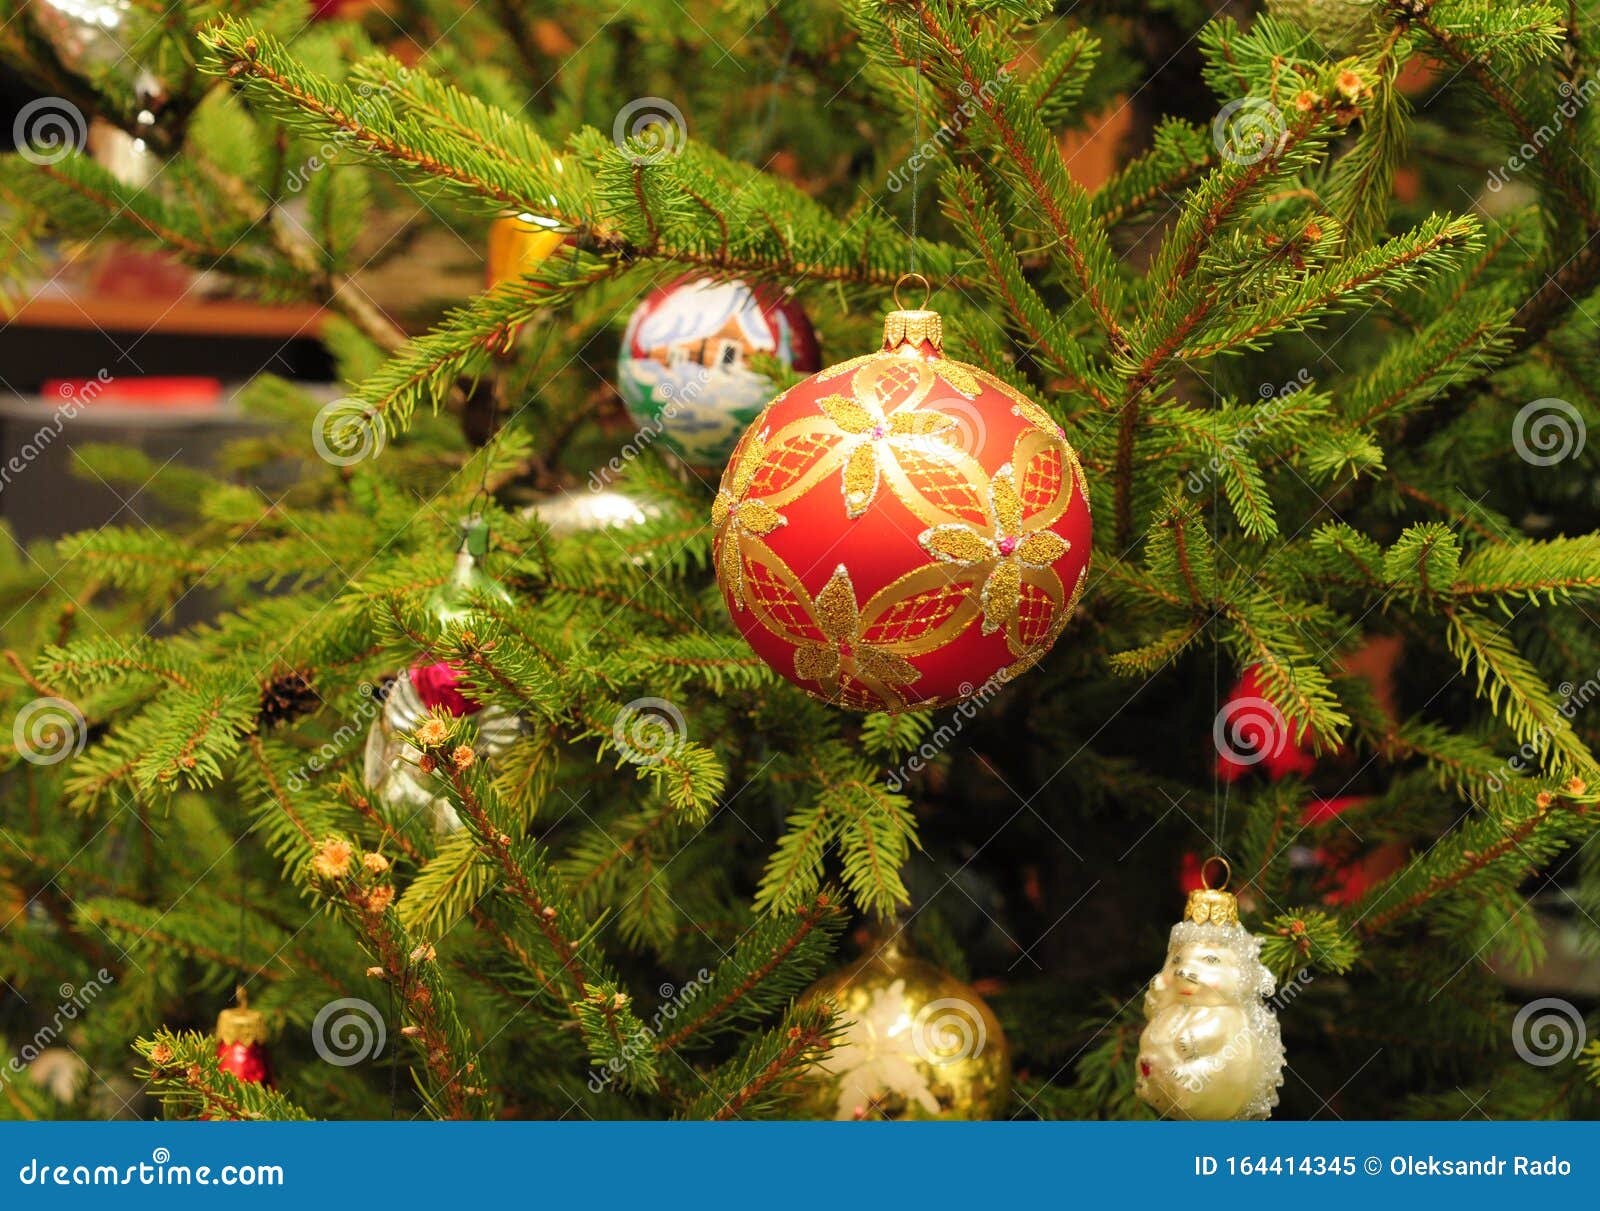 Merry Christmas Colorful Balls on the Evergreen Tree As a Holidays ...